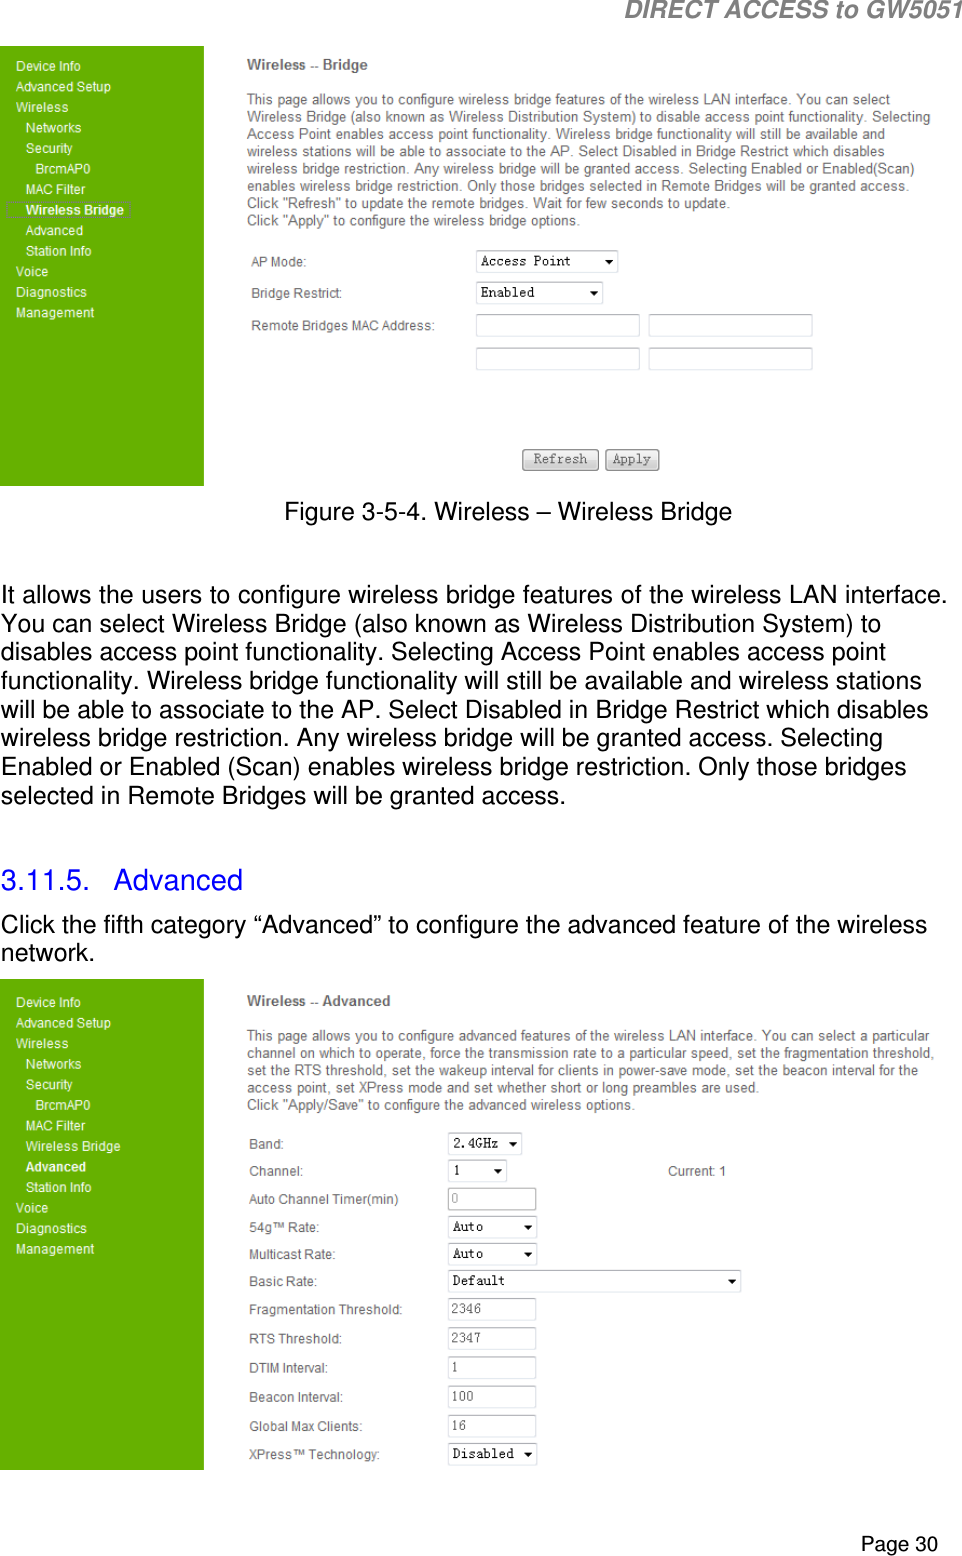                                                                                                                                                                                                                           DIRECT ACCESS to GW5051    Page 30  Figure 3-5-4. Wireless – Wireless Bridge  It allows the users to configure wireless bridge features of the wireless LAN interface. You can select Wireless Bridge (also known as Wireless Distribution System) to disables access point functionality. Selecting Access Point enables access point functionality. Wireless bridge functionality will still be available and wireless stations will be able to associate to the AP. Select Disabled in Bridge Restrict which disables wireless bridge restriction. Any wireless bridge will be granted access. Selecting Enabled or Enabled (Scan) enables wireless bridge restriction. Only those bridges selected in Remote Bridges will be granted access.  3.11.5.  Advanced Click the fifth category “Advanced” to configure the advanced feature of the wireless network.  